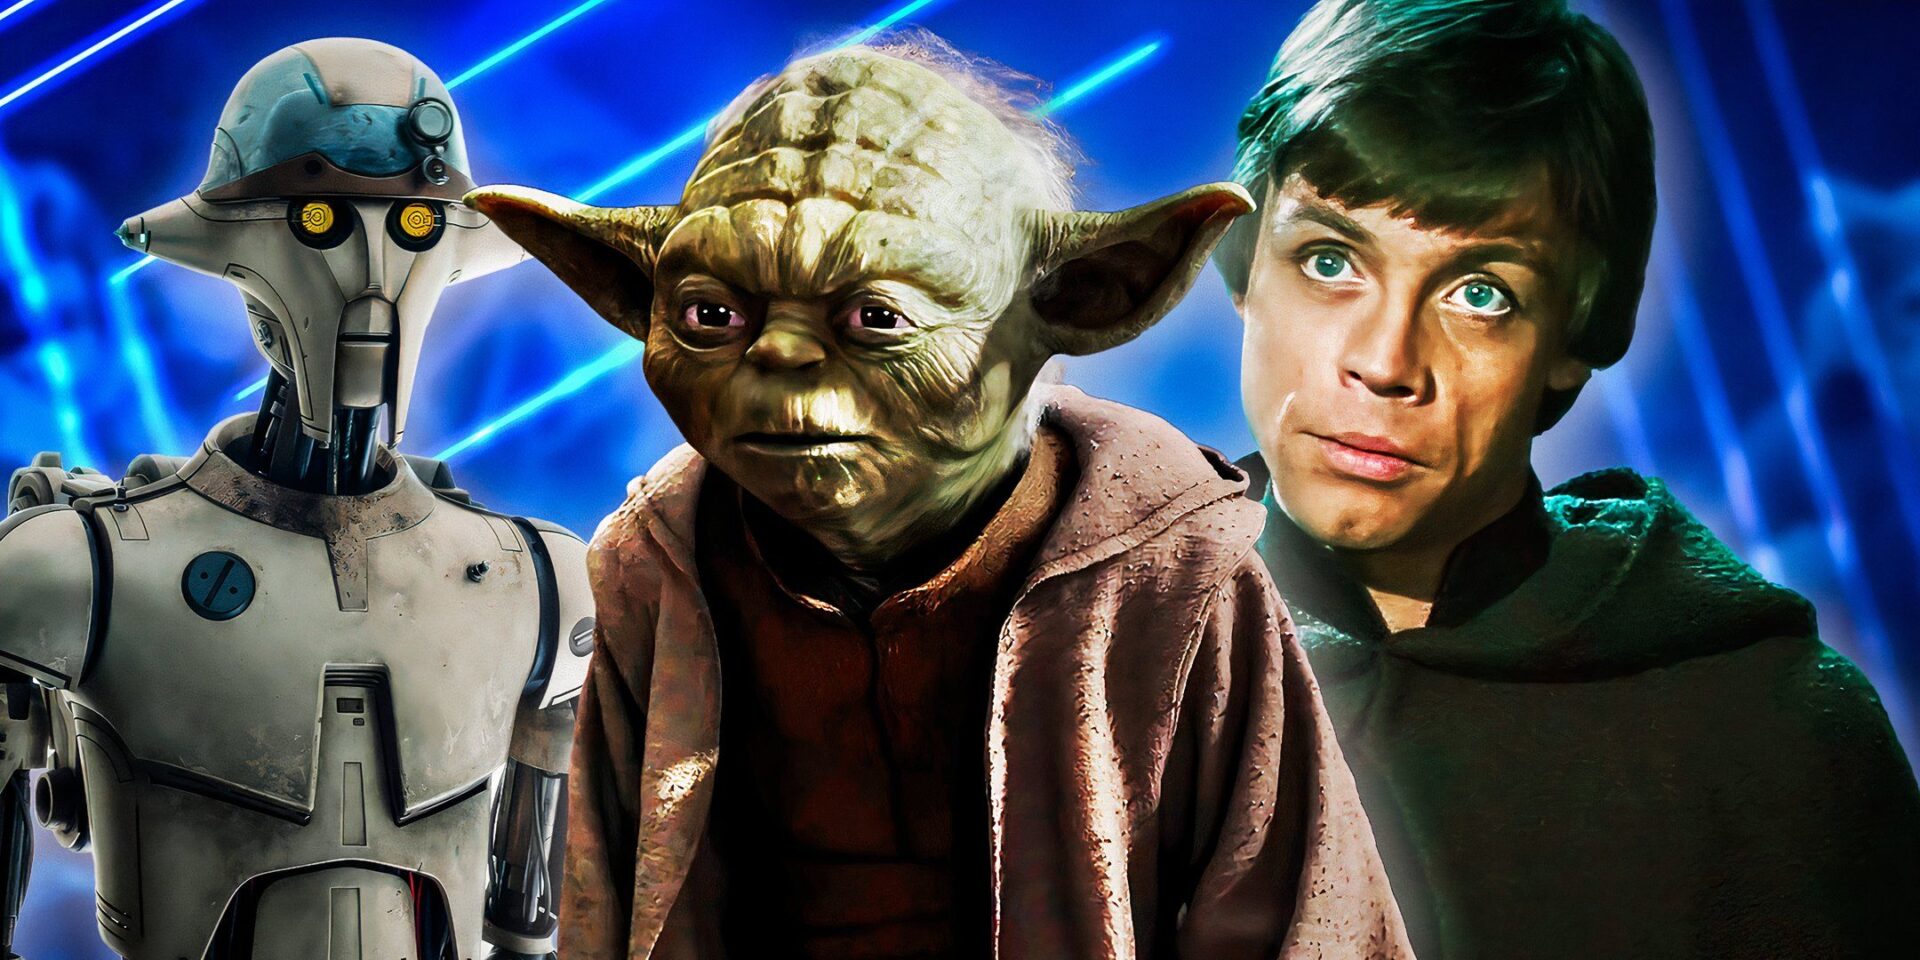 Star Wars: 8 Mysteries Of The Jedi Order We'll Likely Never Figure Out